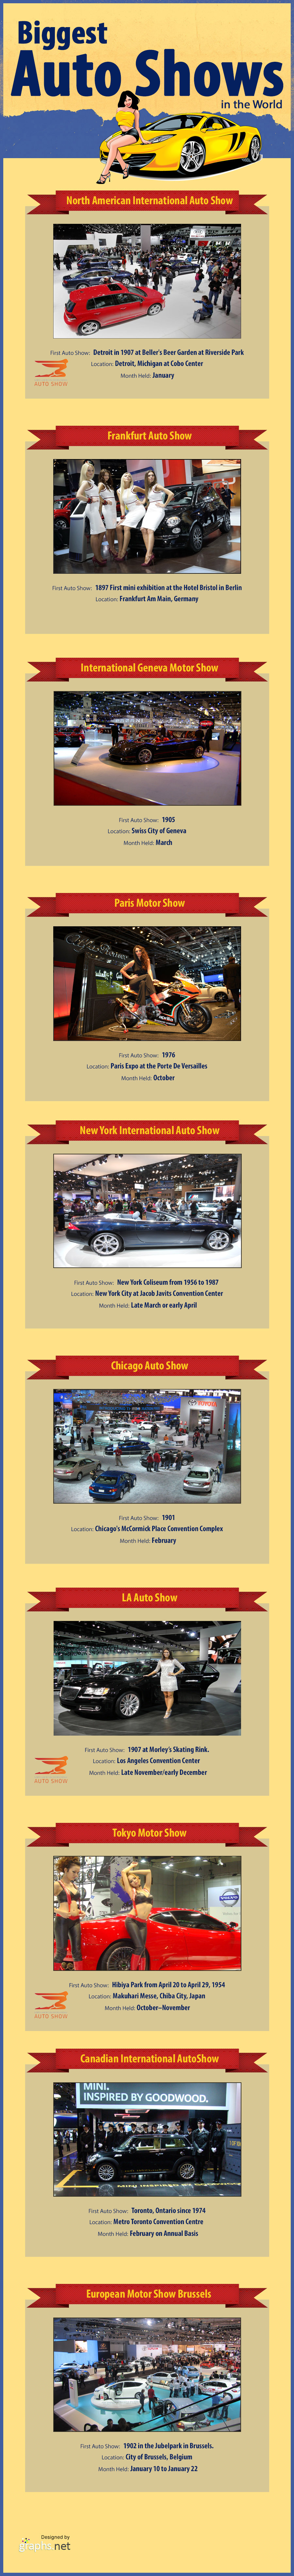 Biggest Auto Shows in the World